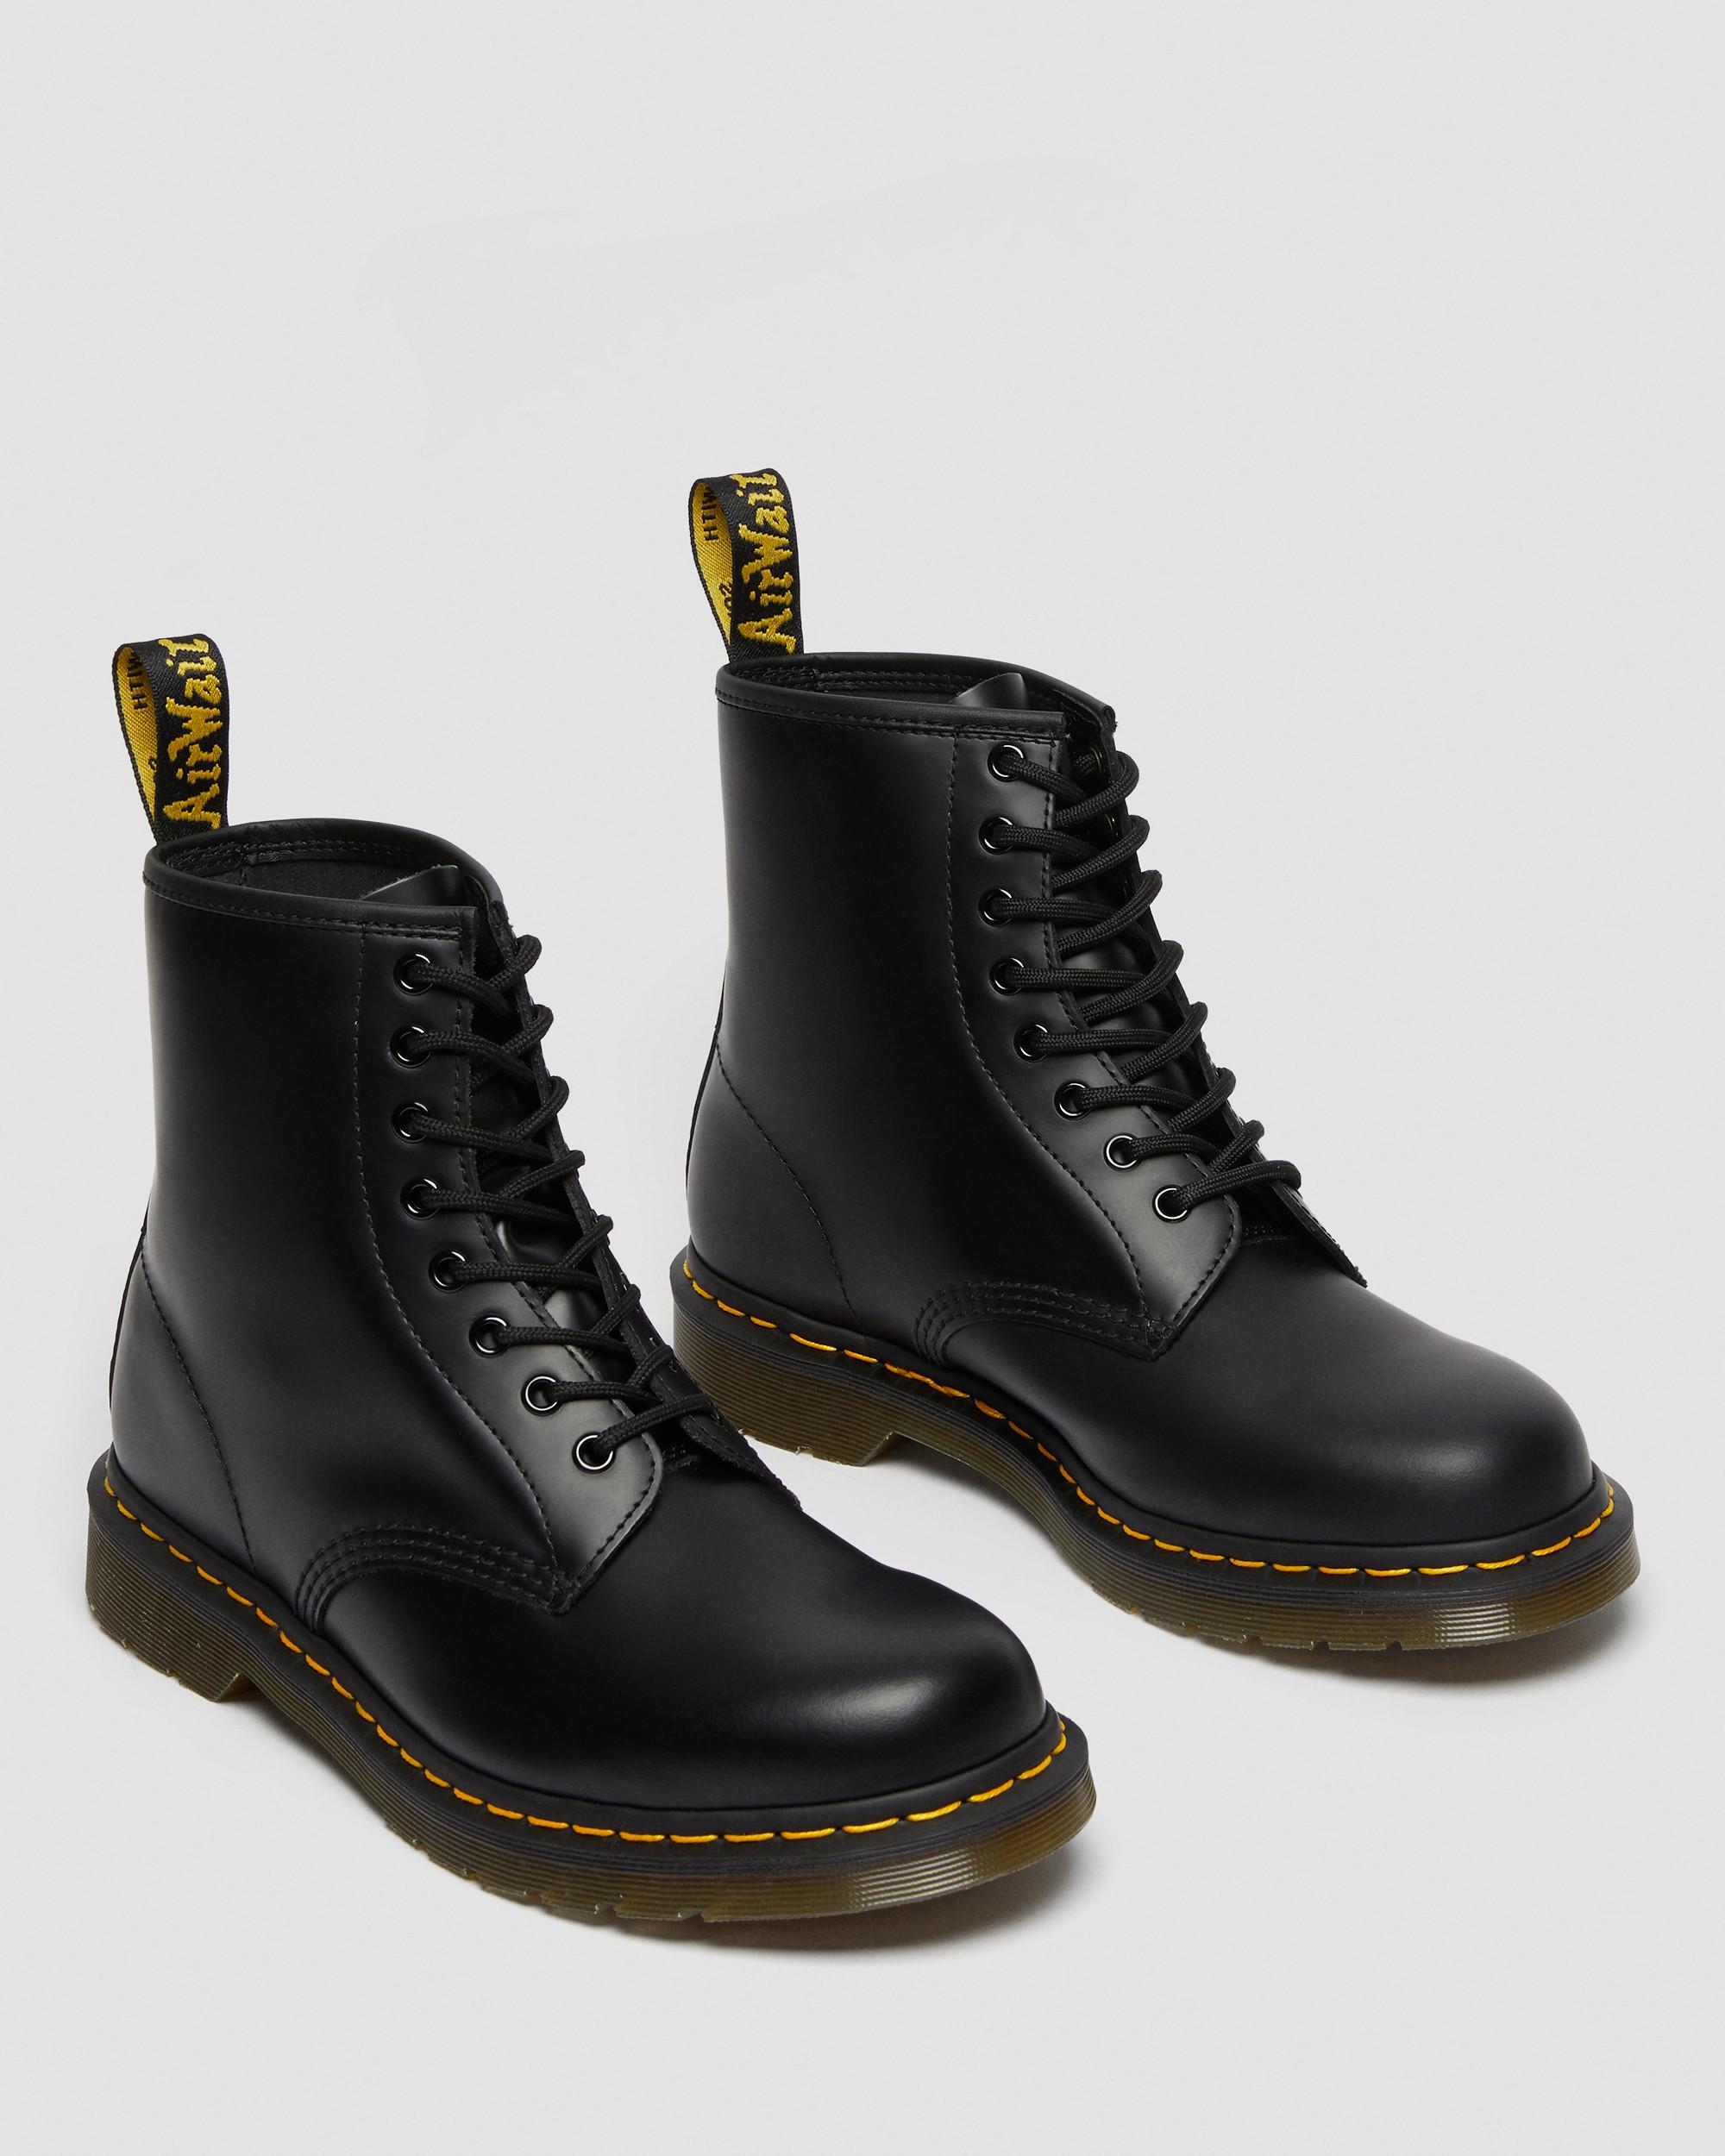 Dr. Black Up Smooth Boots | Leather Lace 1460 Martens in